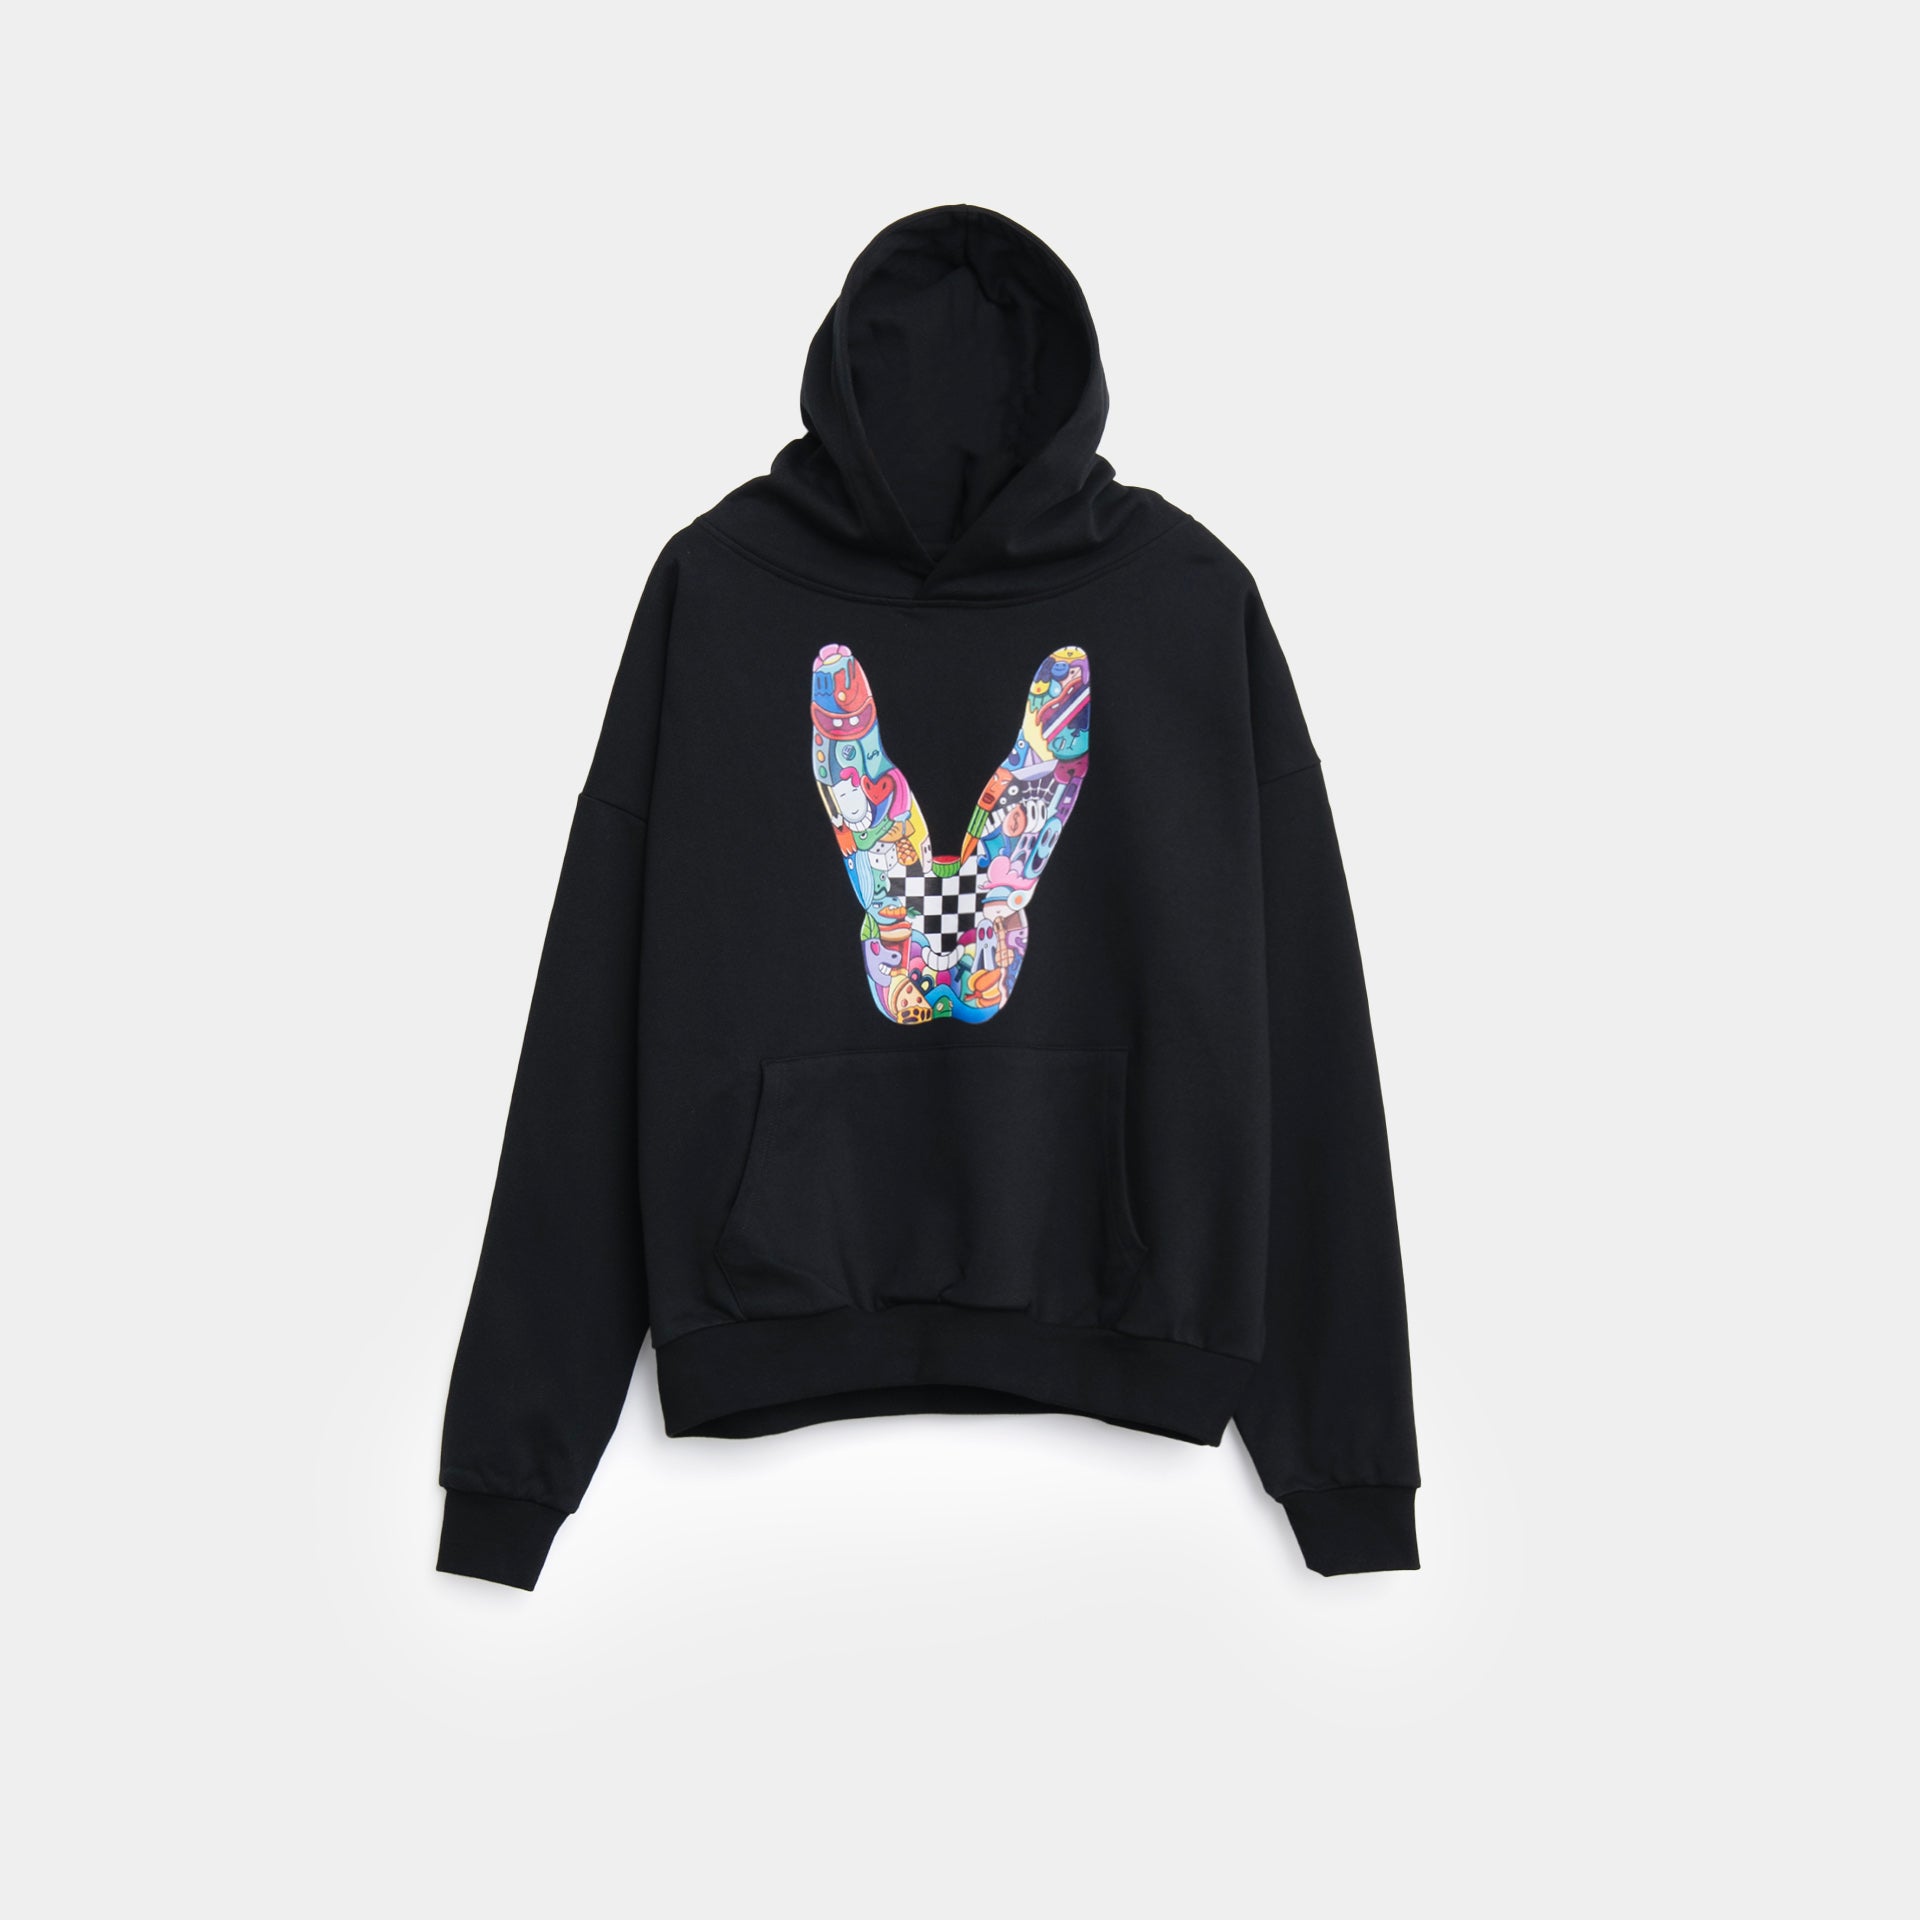 Black Hoodie with Paint Detail by BrandTionary